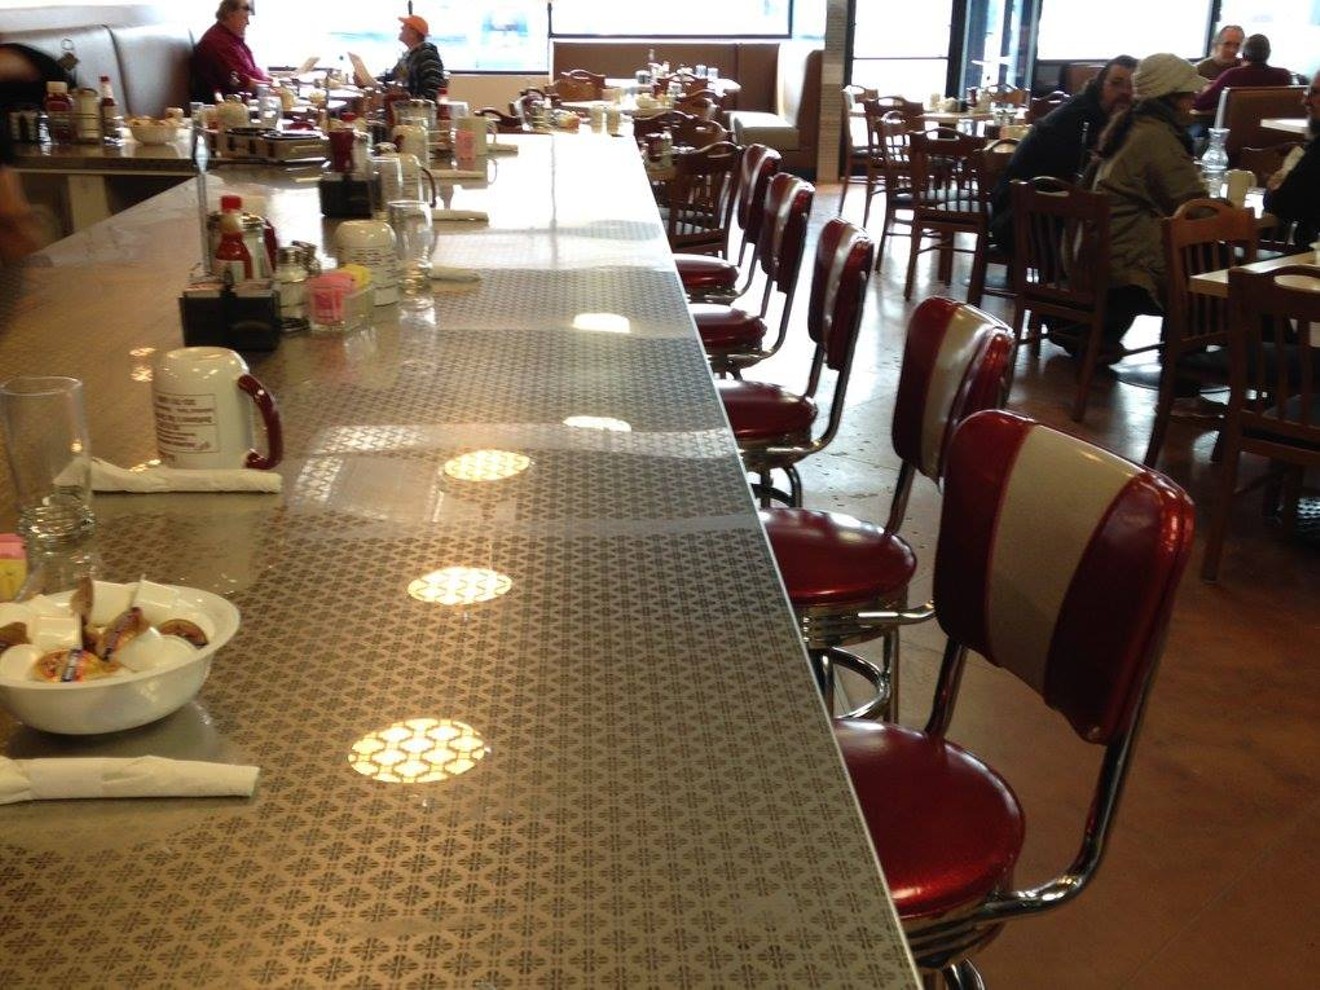 The best diners have diner counters.